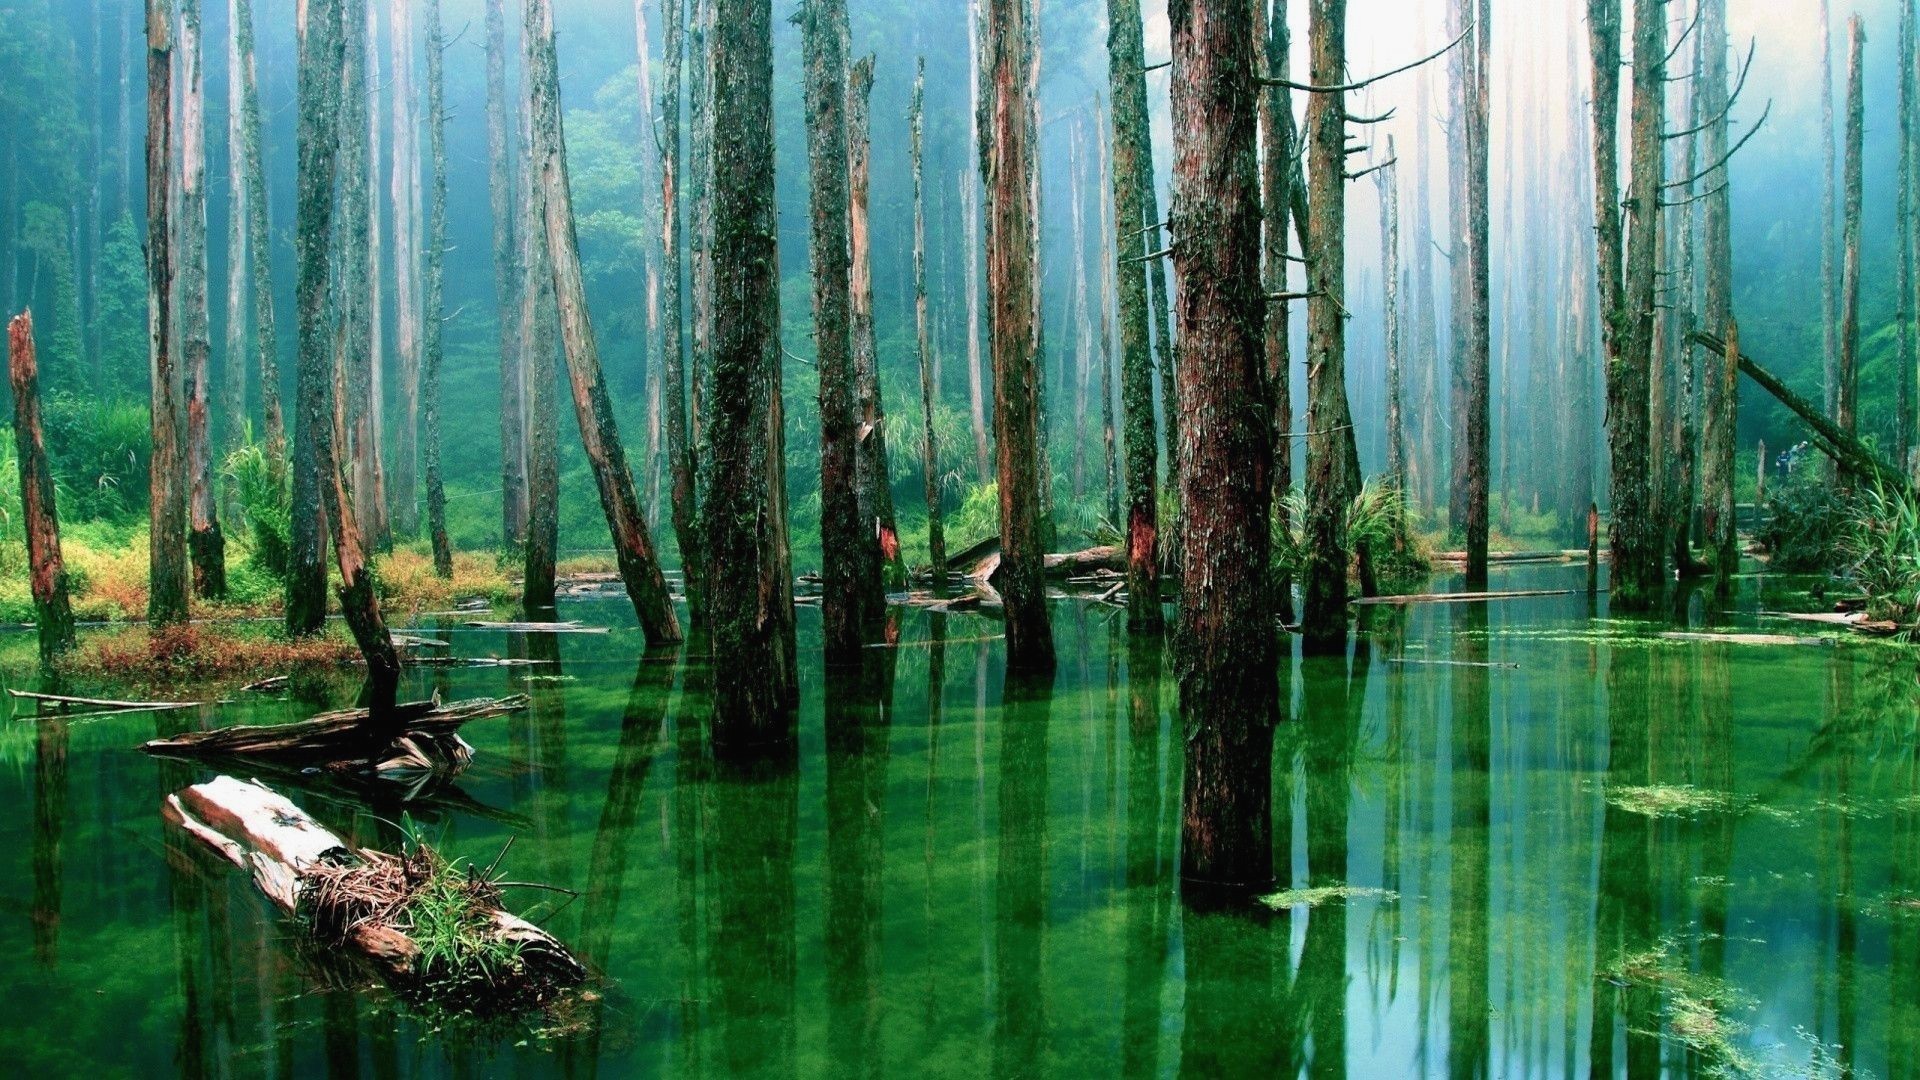 1920x1080, Amazon 3d Wallpaper Awesome Hd Widescreen - Flooded Forest - HD Wallpaper 